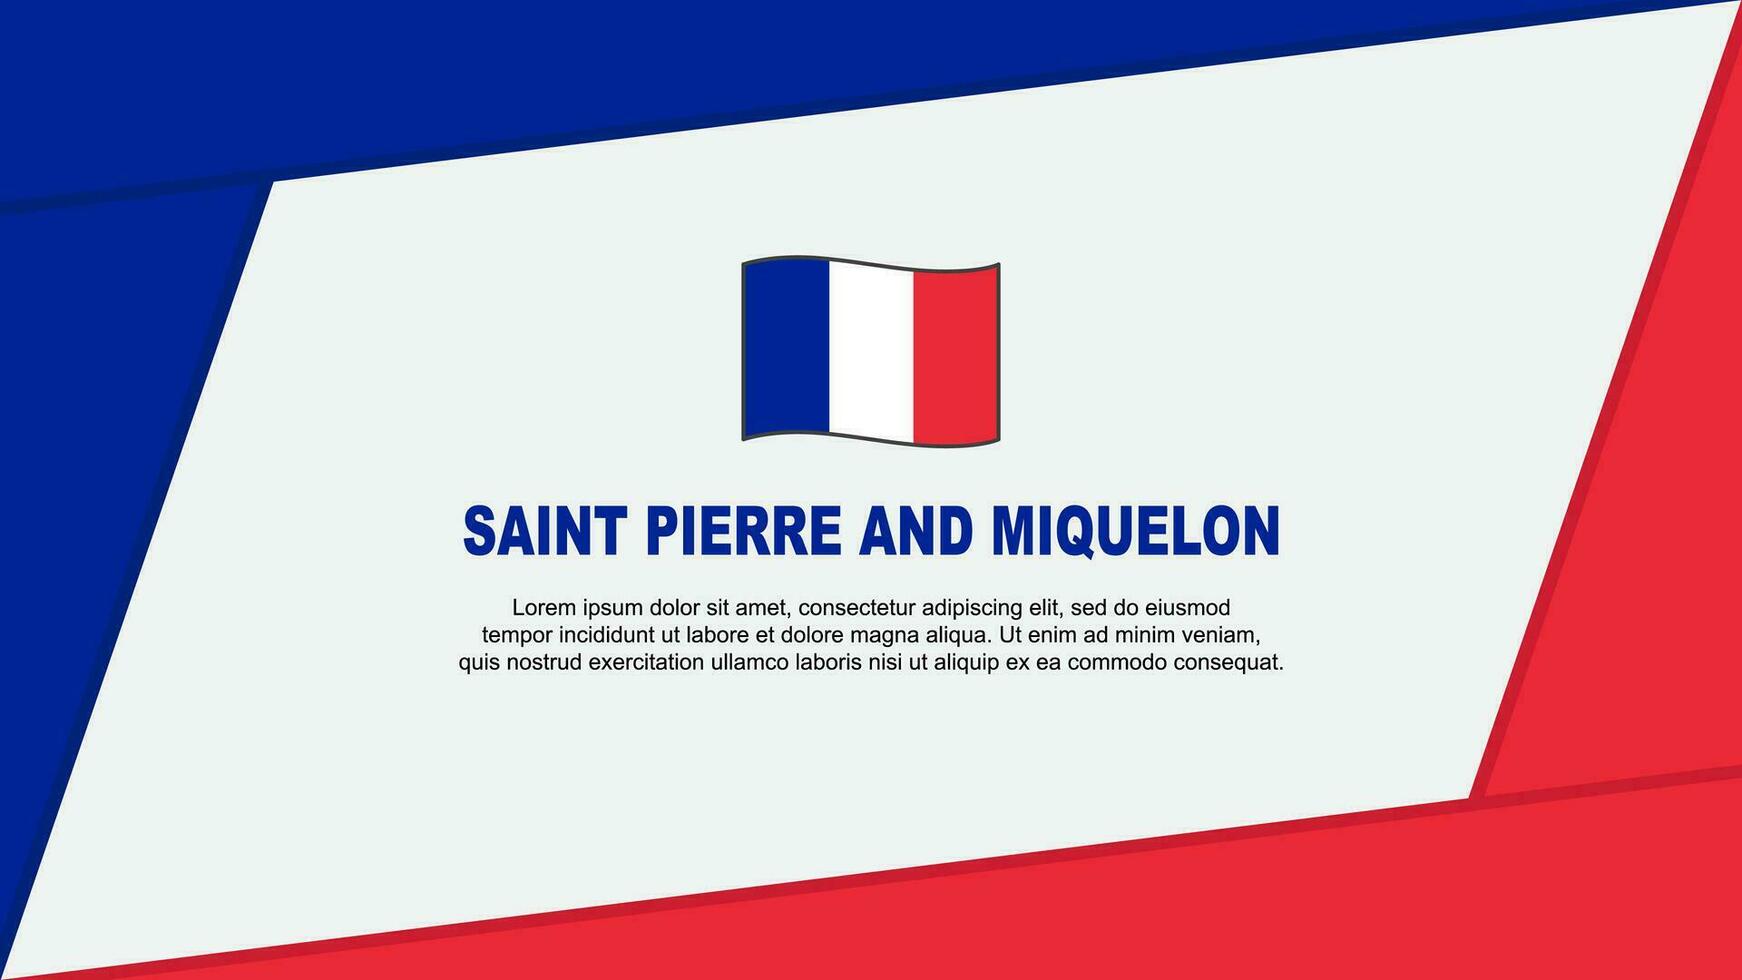 Saint Pierre And Miquelon Flag Abstract Background Design Template. Saint Pierre And Miquelon Independence Day Banner Vector Illustration. Banner